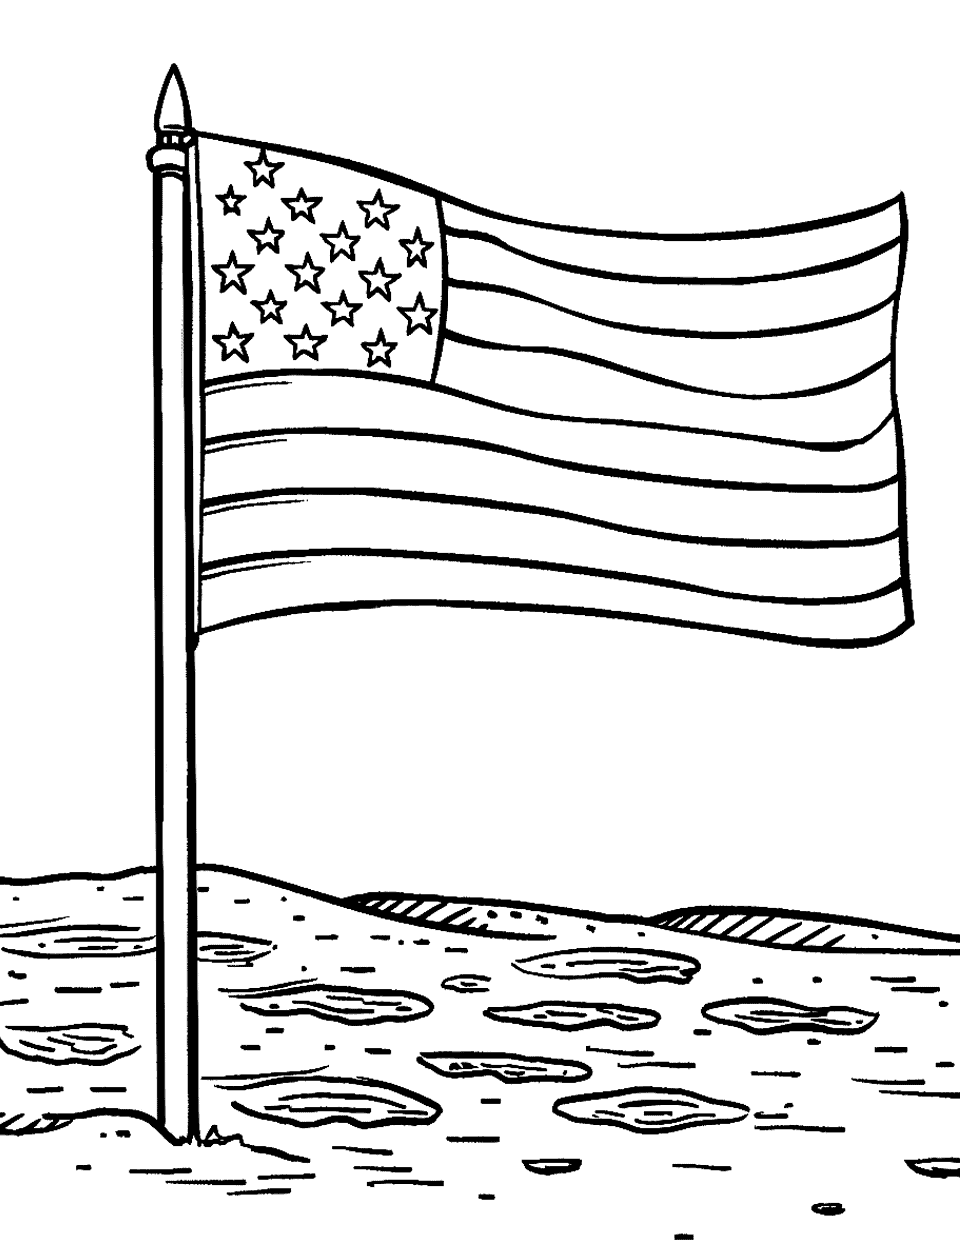 American Flag on the Moon Coloring Page - The United States flag planted on the moon’s surface.